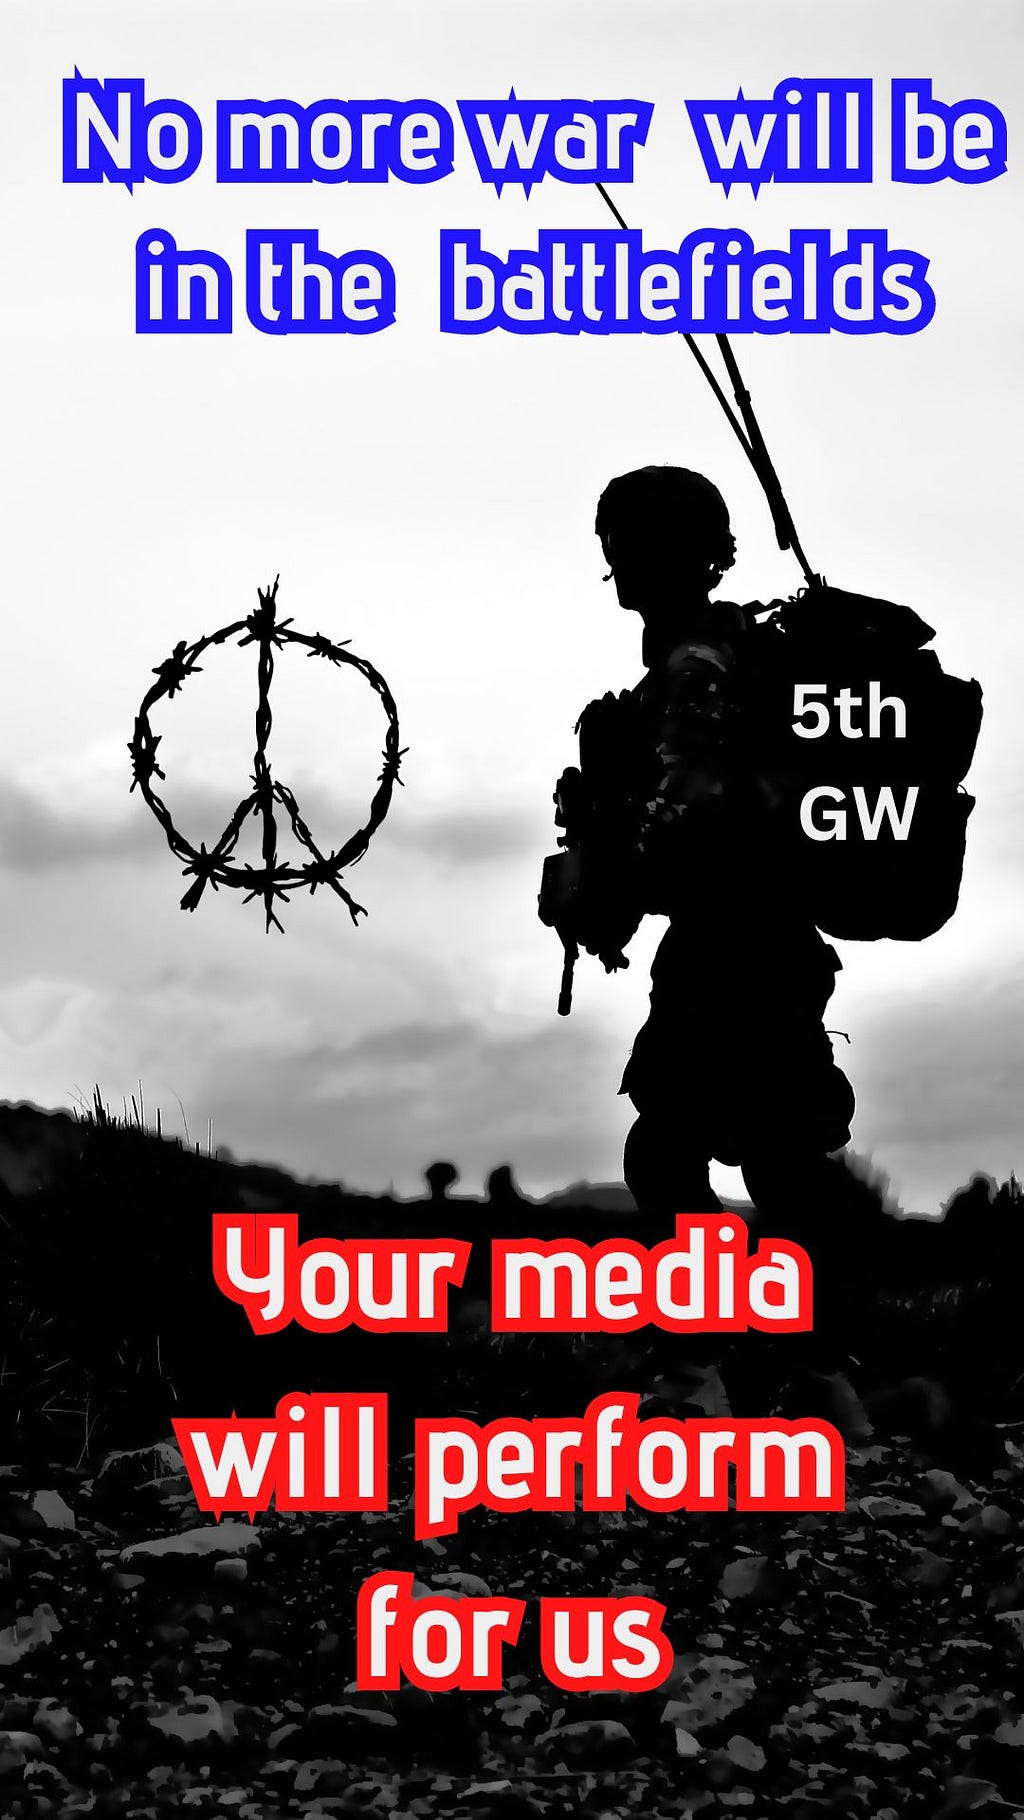 it is 5th generation warfare, now we will fight through your media